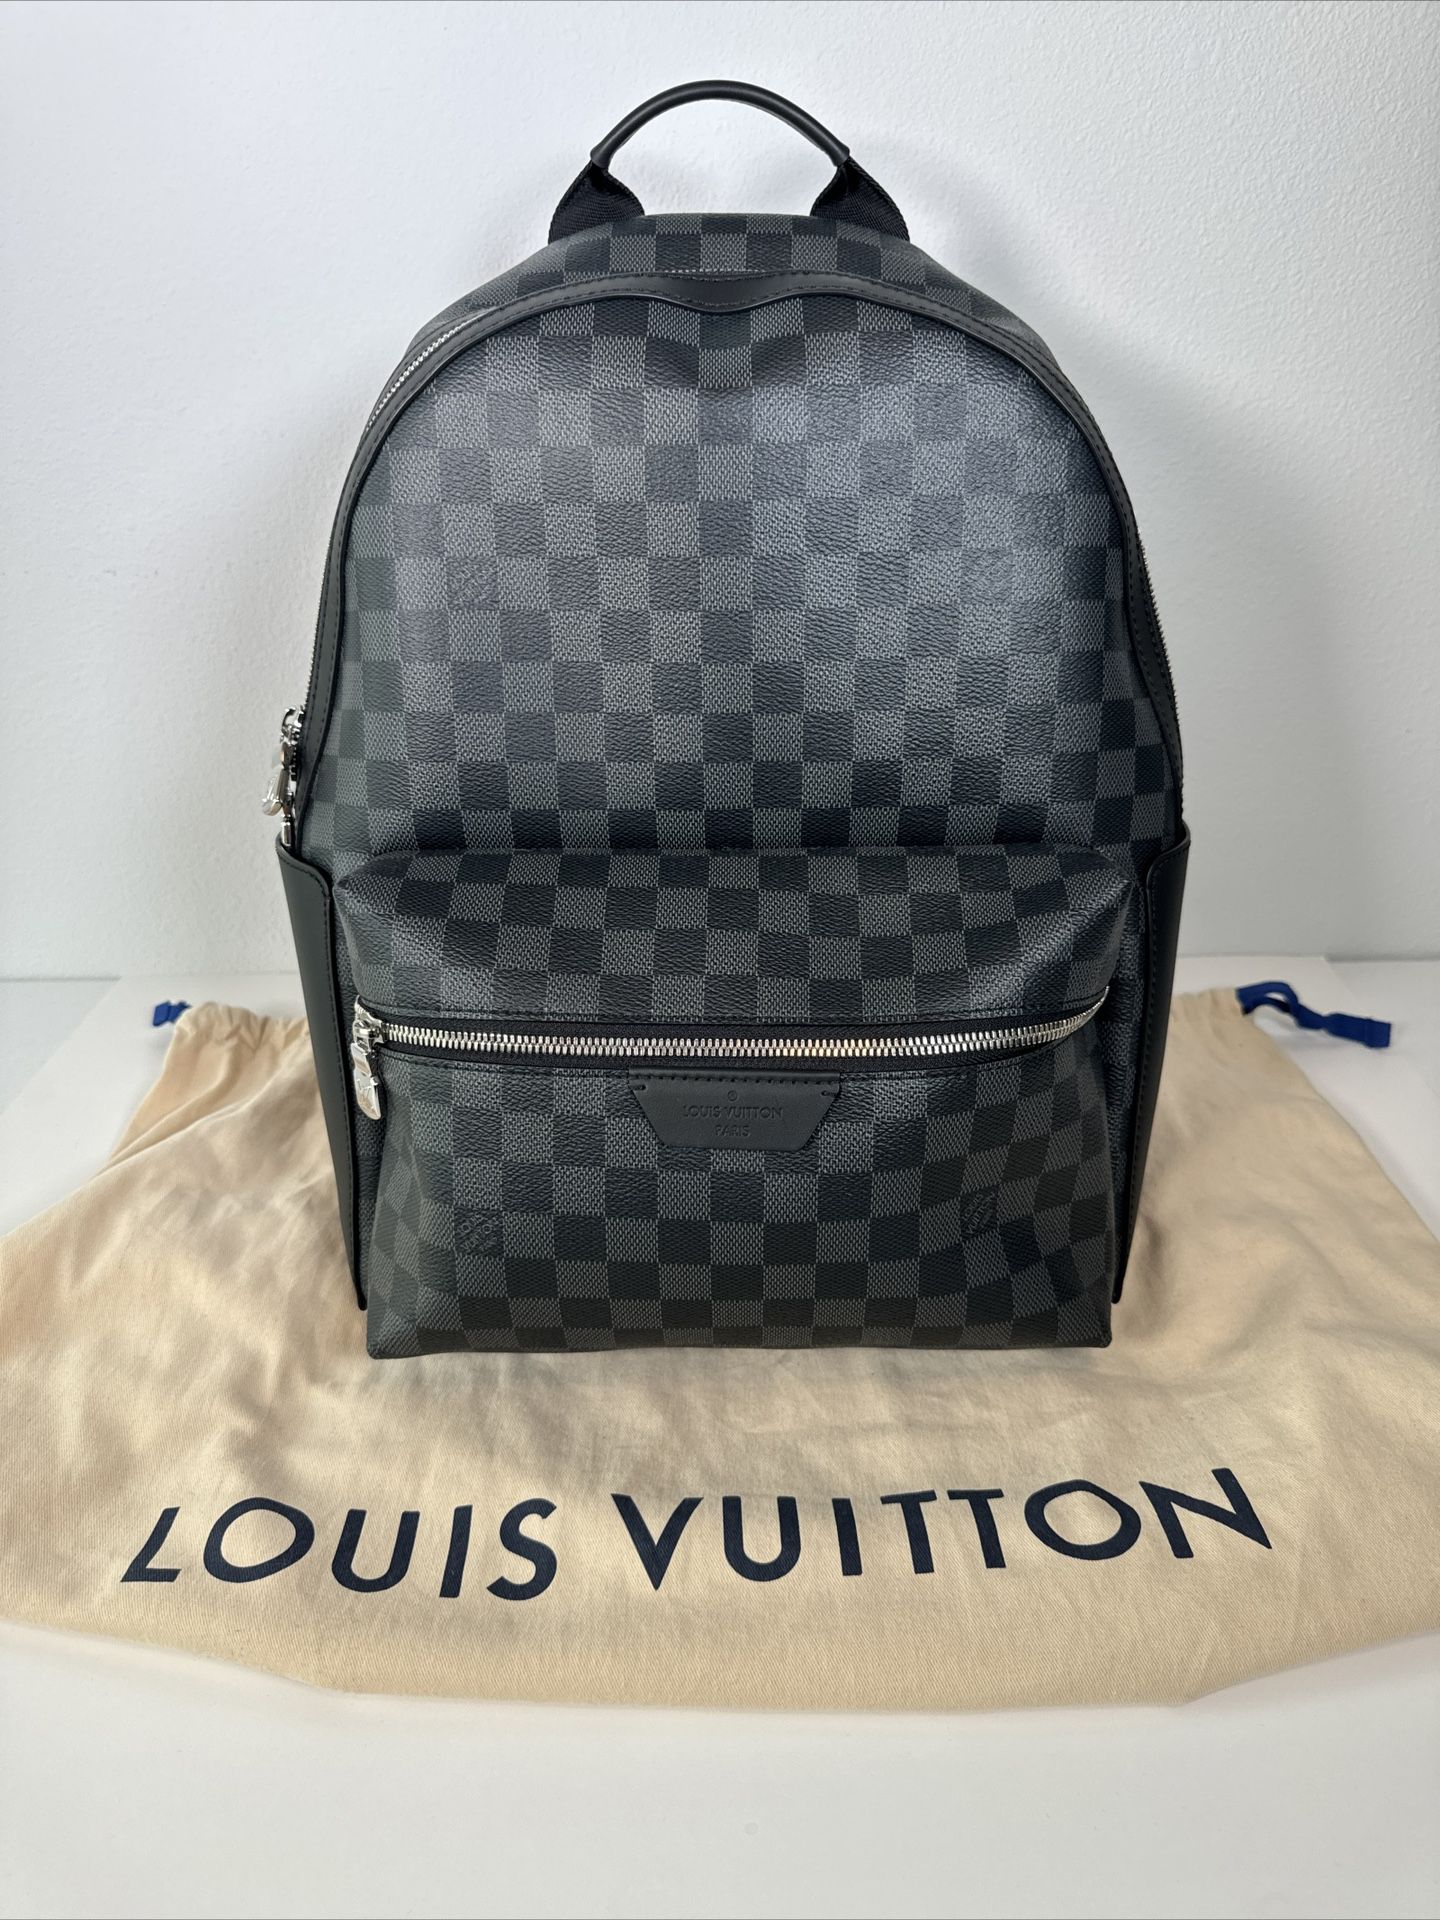 Louis Vuitton Discovery Backpack Damier Graphite Canvas PM (Black/gray)